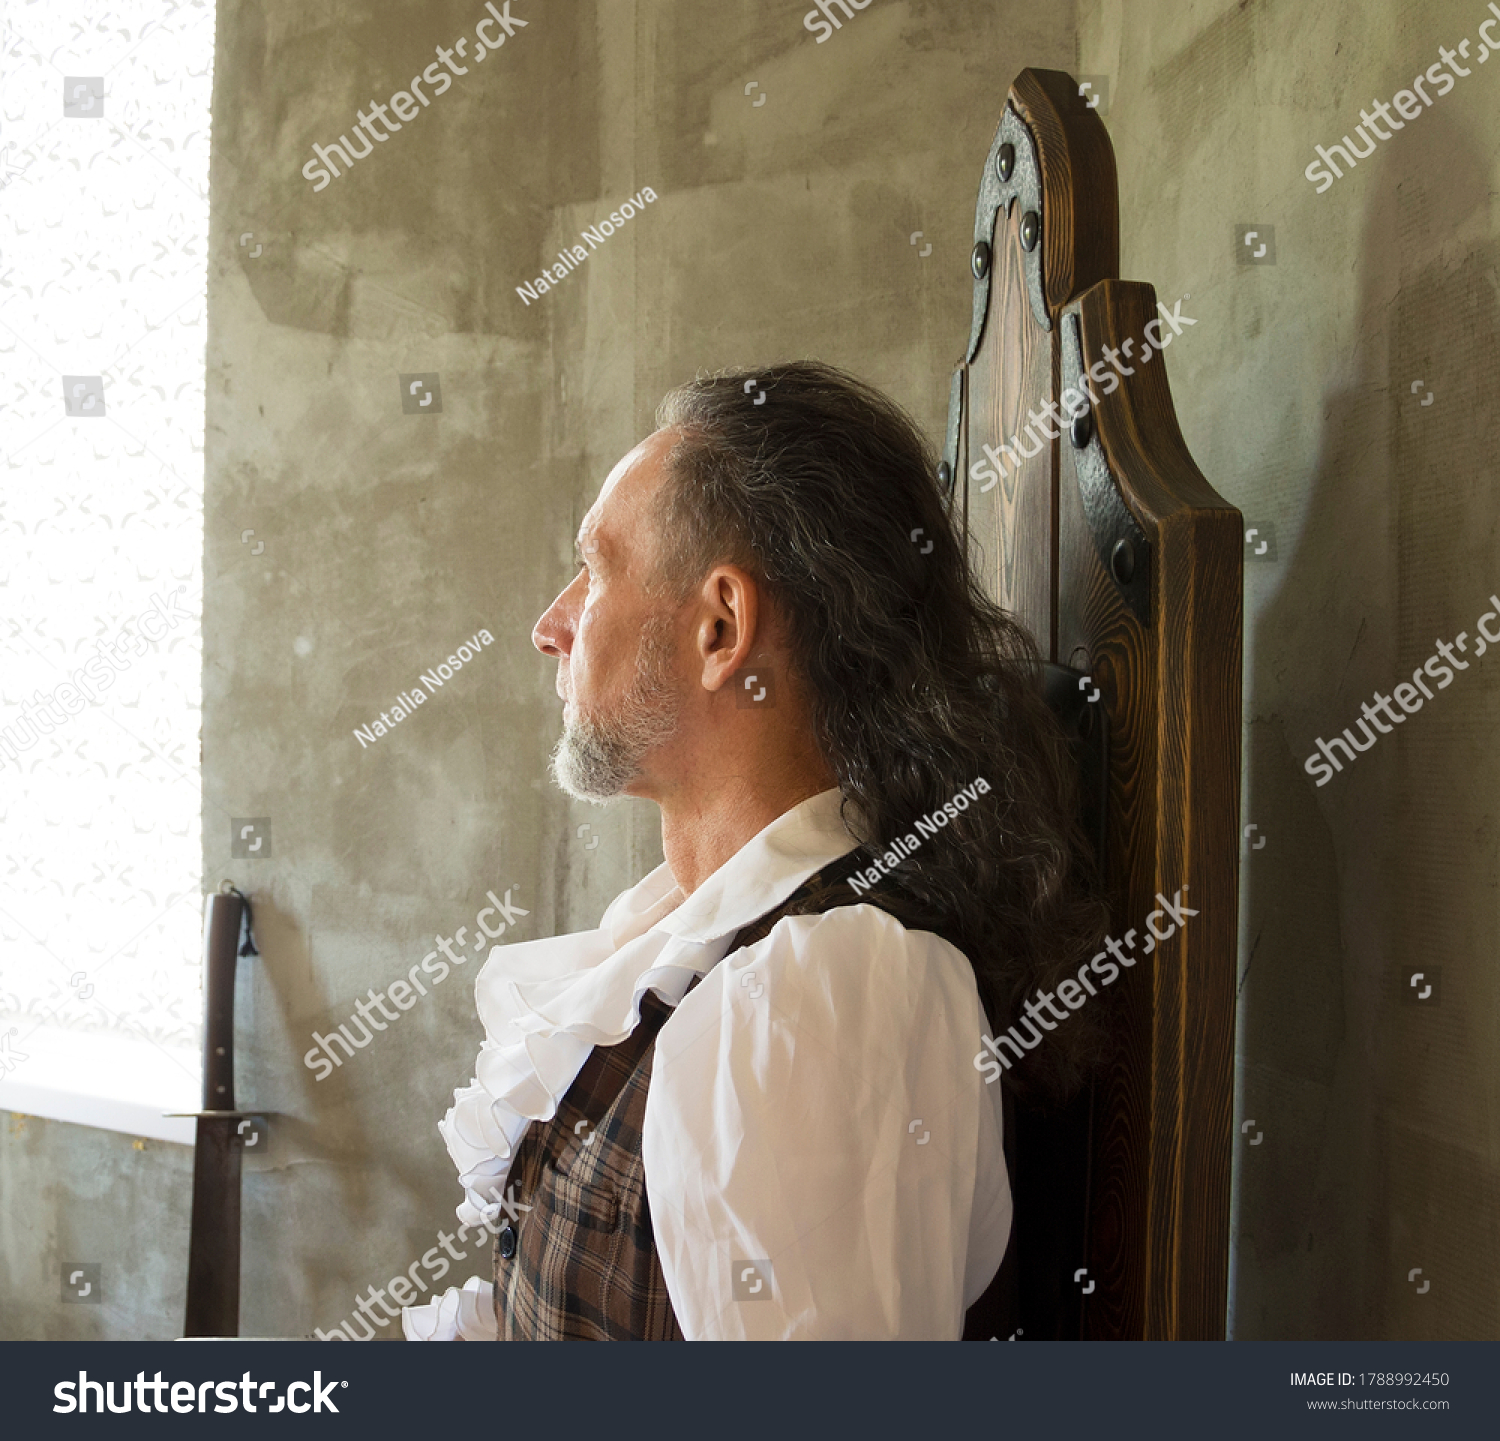 Portrait of a man with a beard in profile in vintage clothing, looking out the window on a gray background. Cosplay. #1788992450